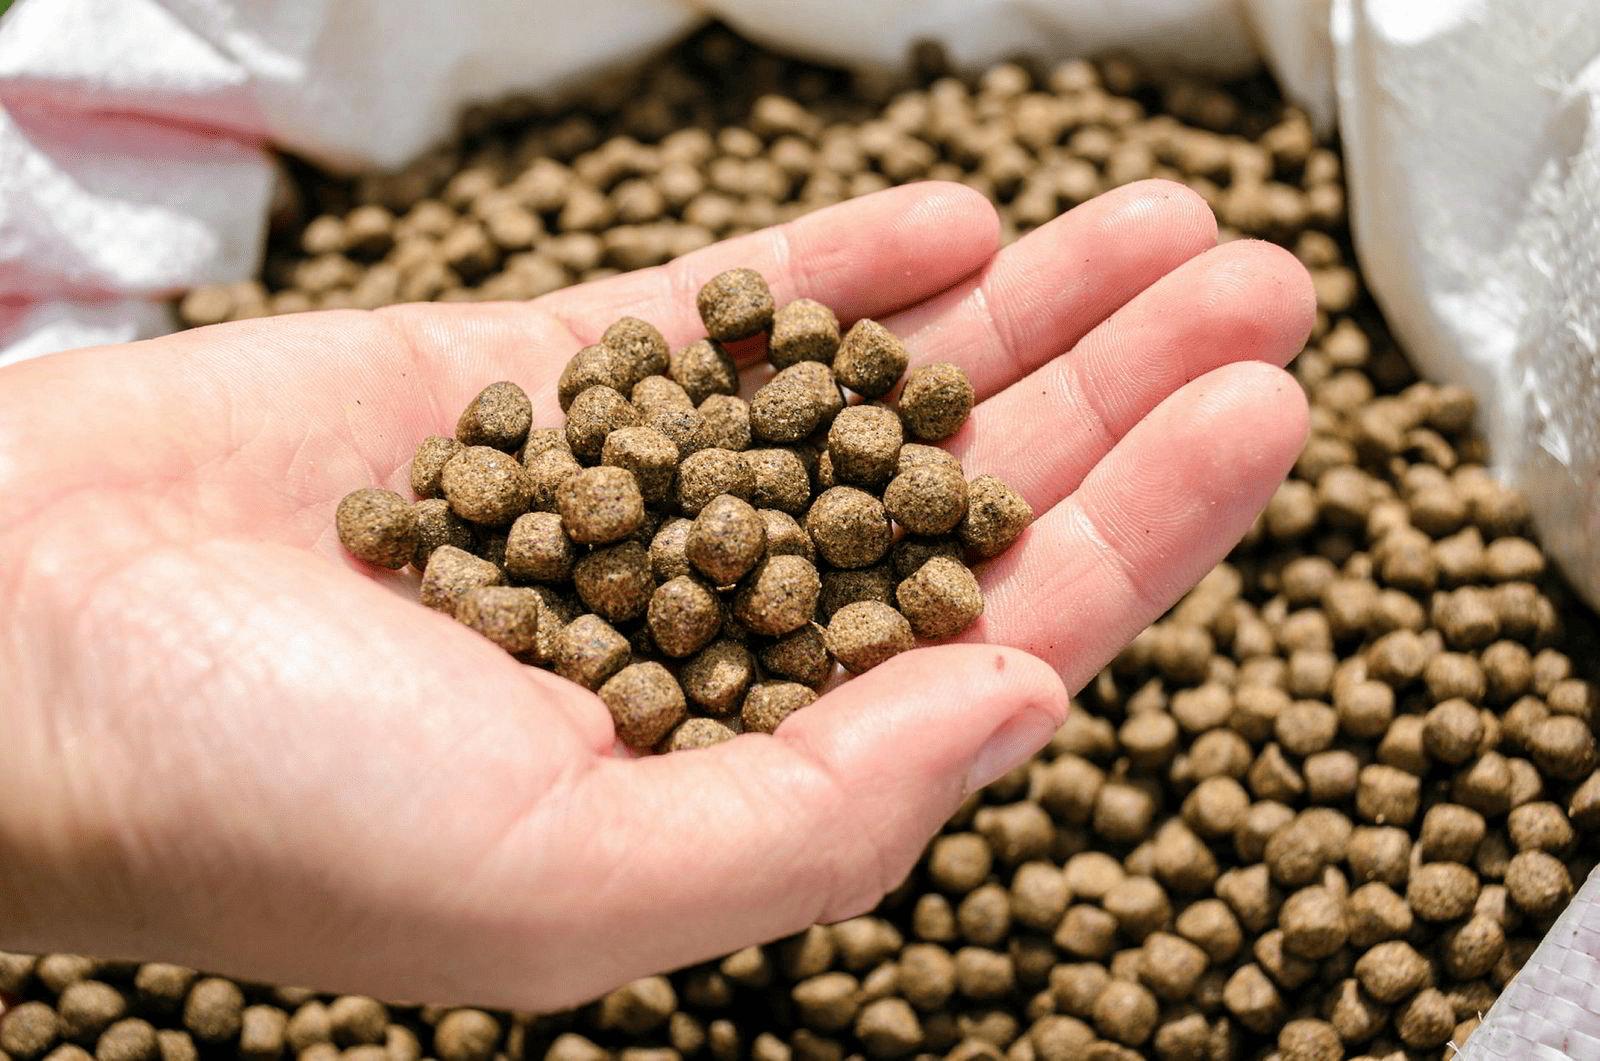 Fish Meal Market Overview, Global Demand, Leading Companies and Research Report 2023-2028